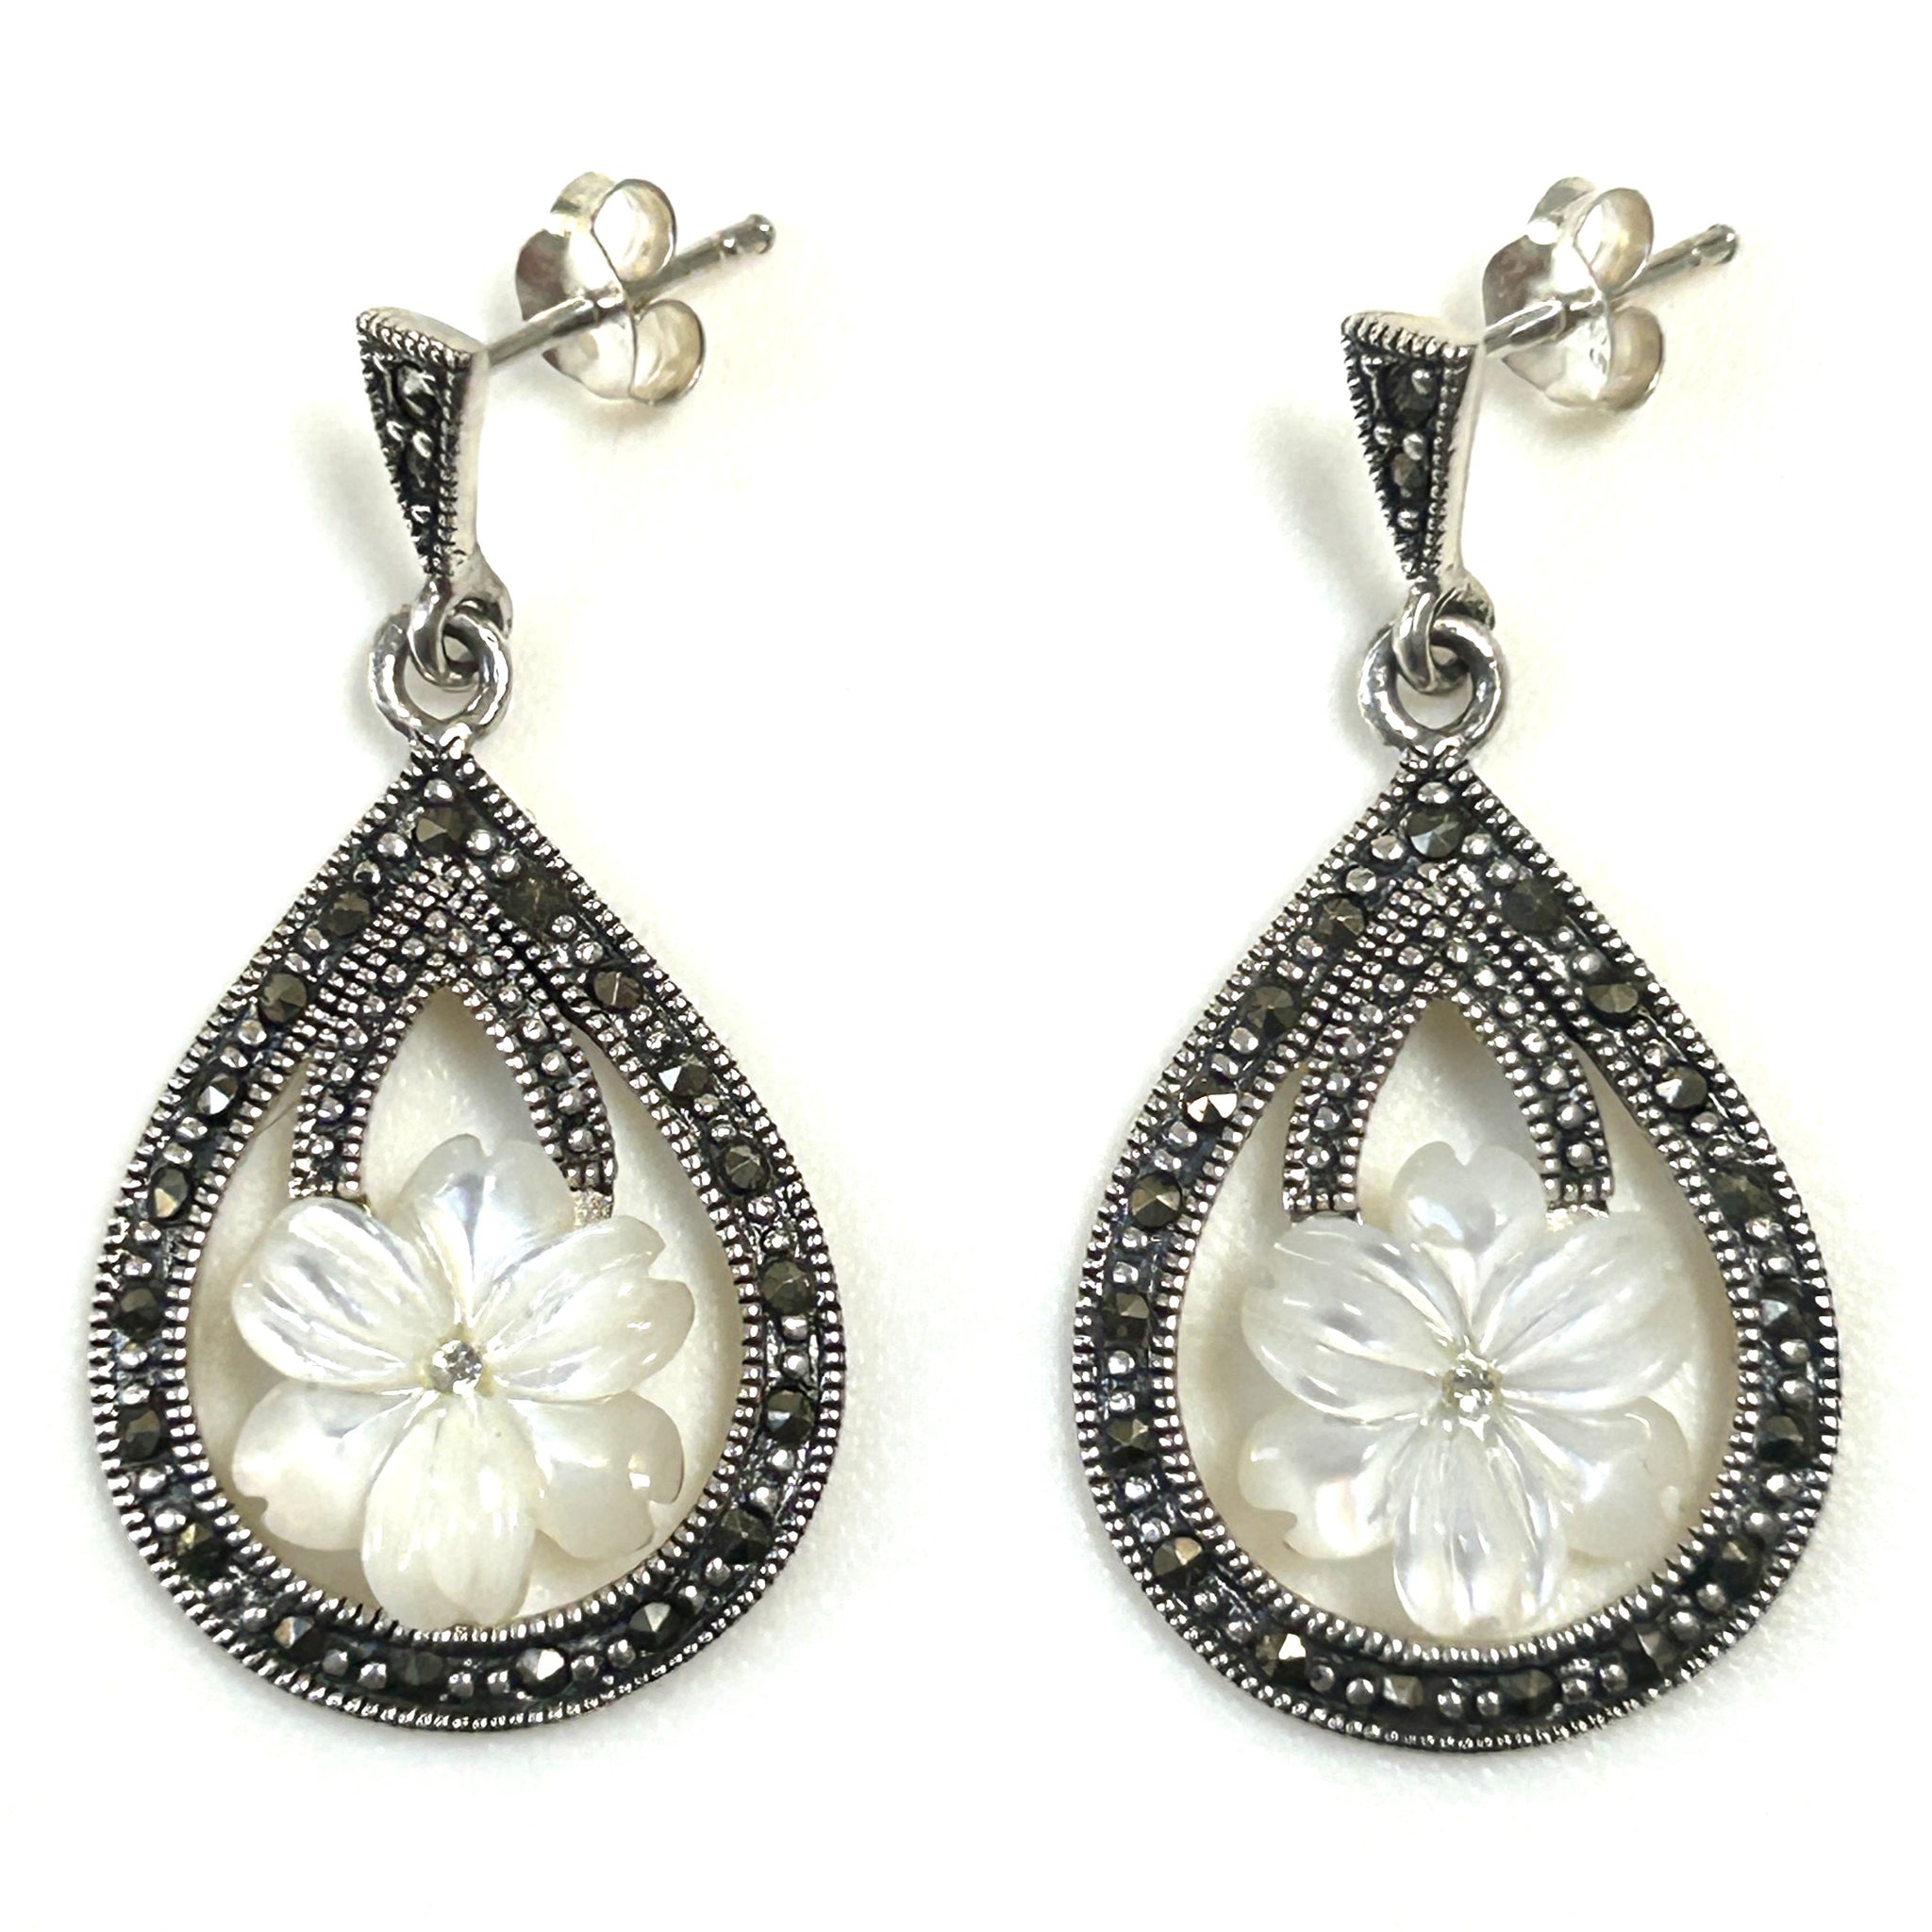 Silver, Mother-of-Pearl, and Marcasite “Flower” Drop Earrings